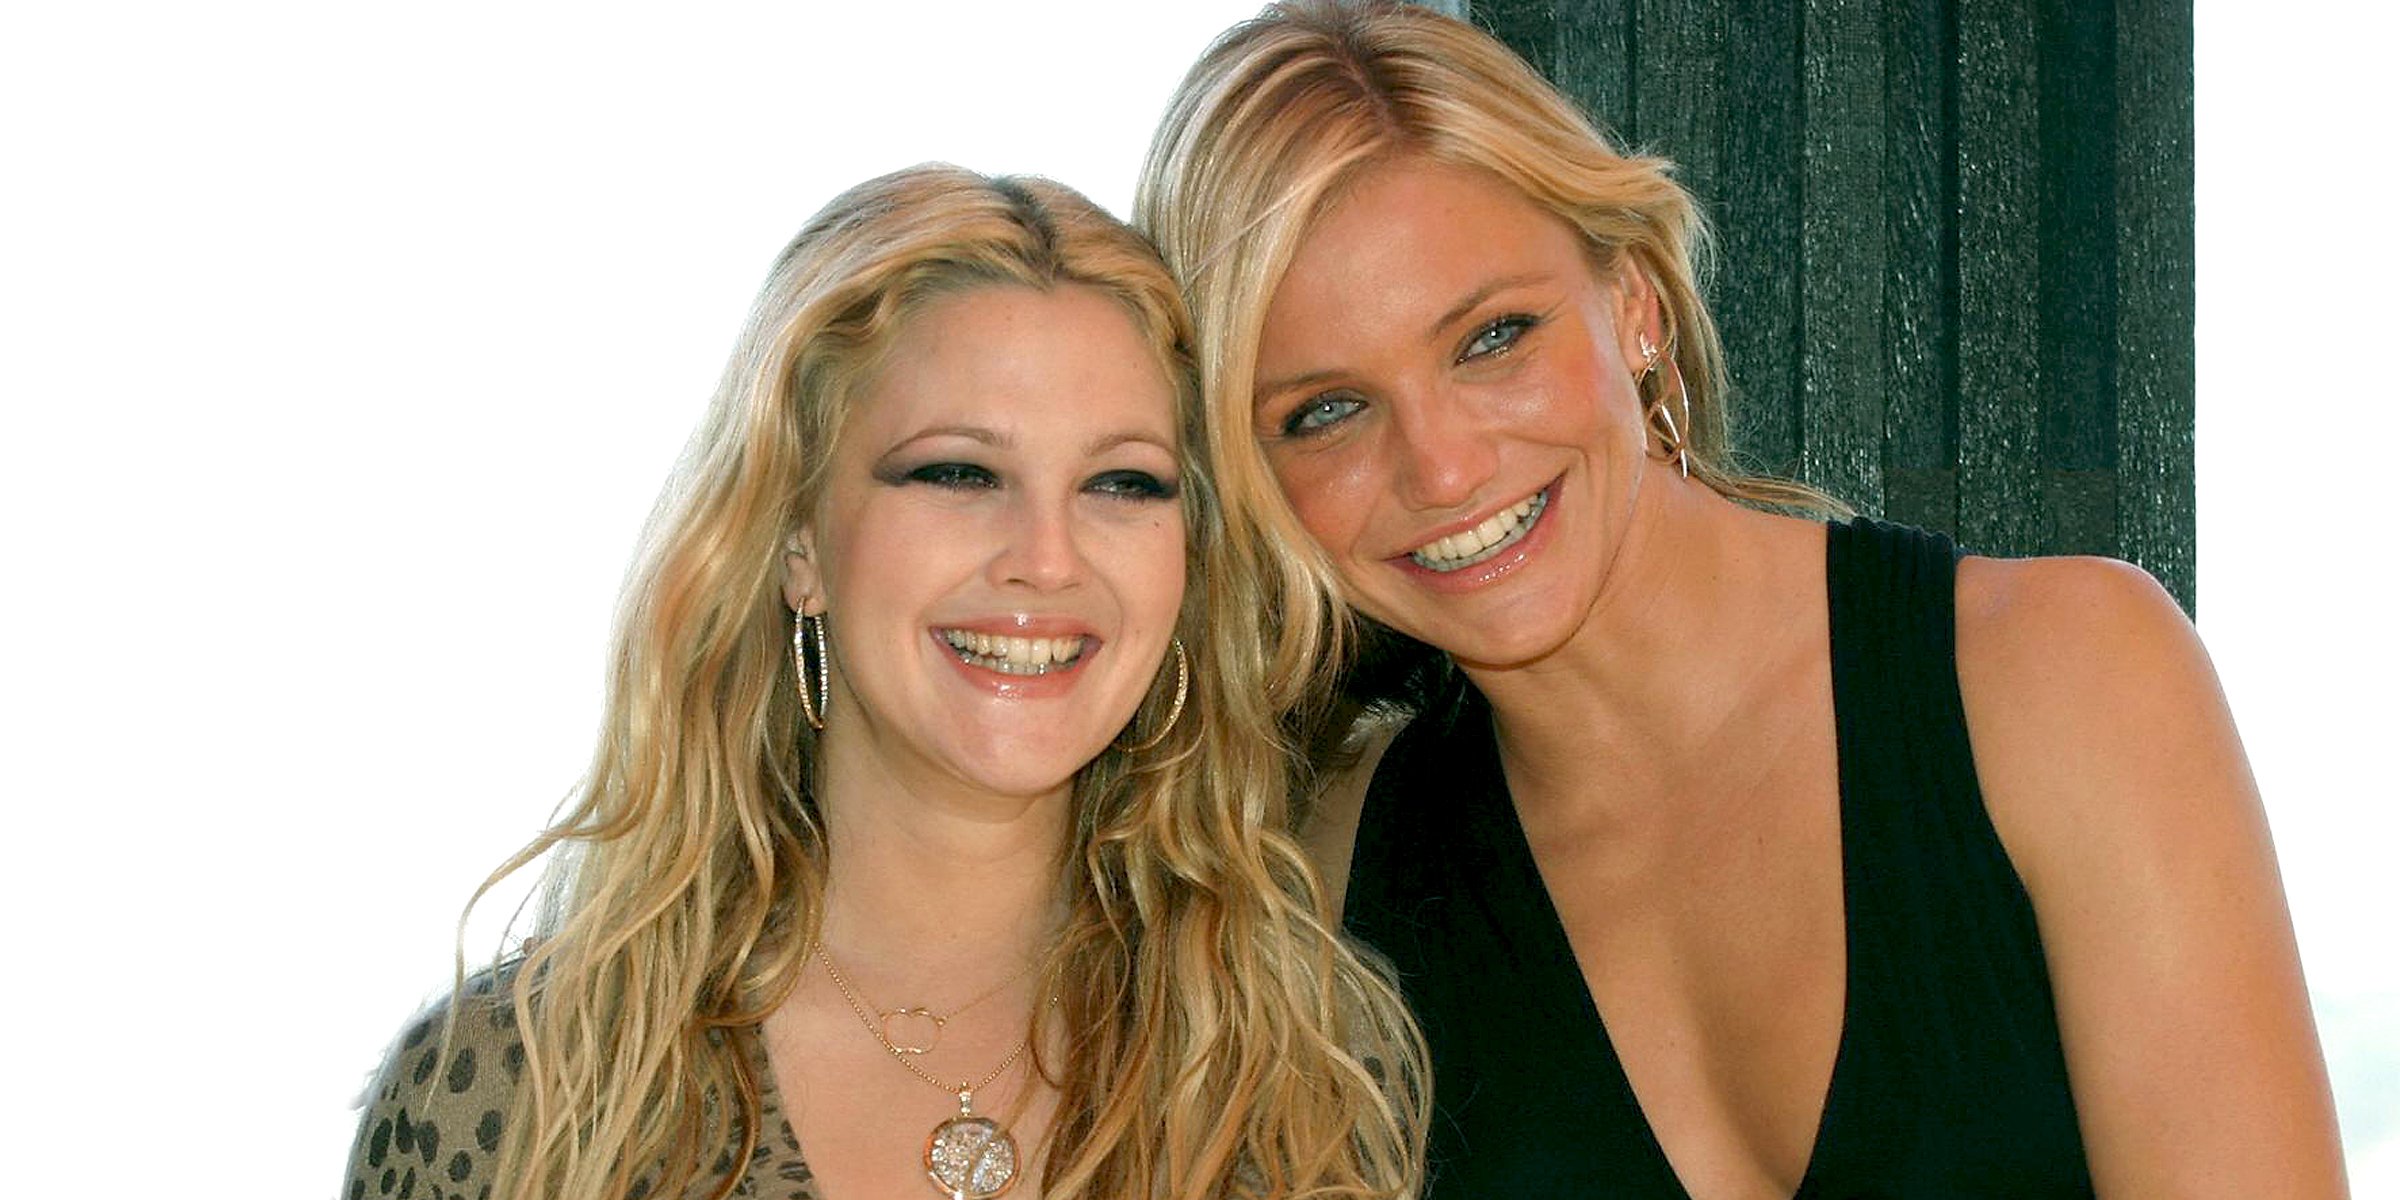 Drew Barrymore and Cameron Diaz | Source: Getty Images